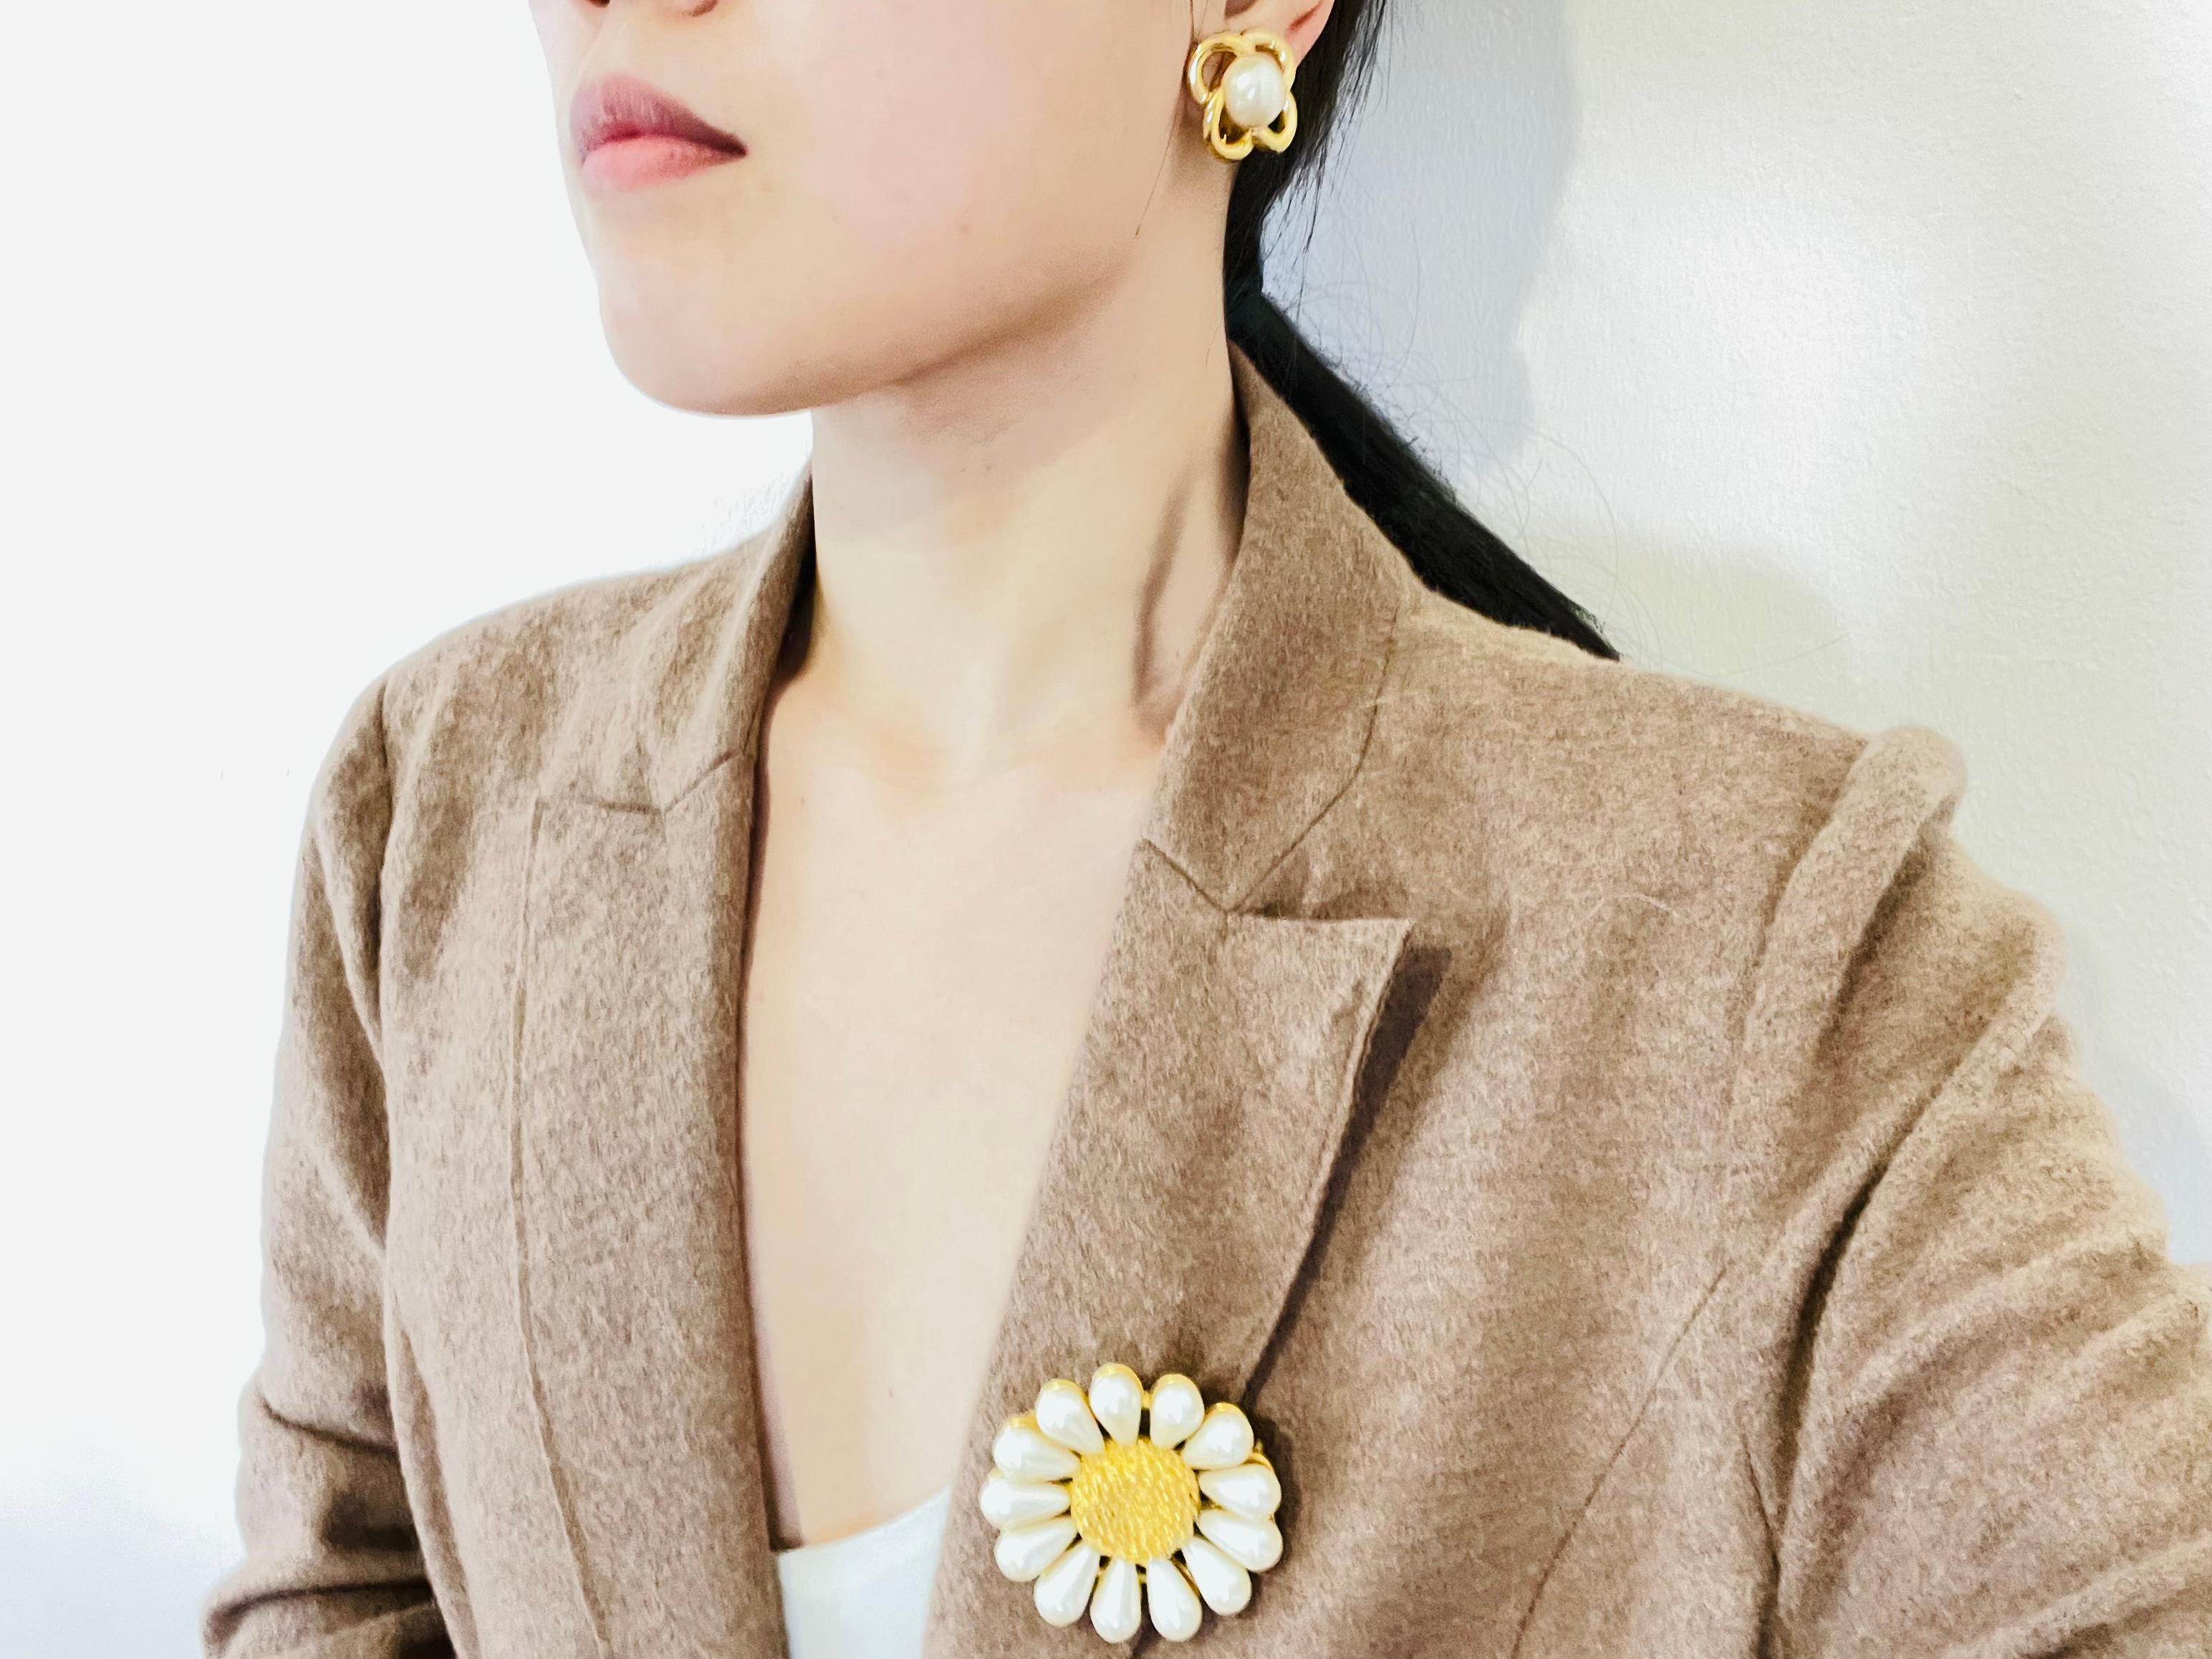 Givenchy Vintage 1990s Large Pearl White Yellow Daisy Flower Gold Retro Brooch  In Good Condition For Sale In Wokingham, England